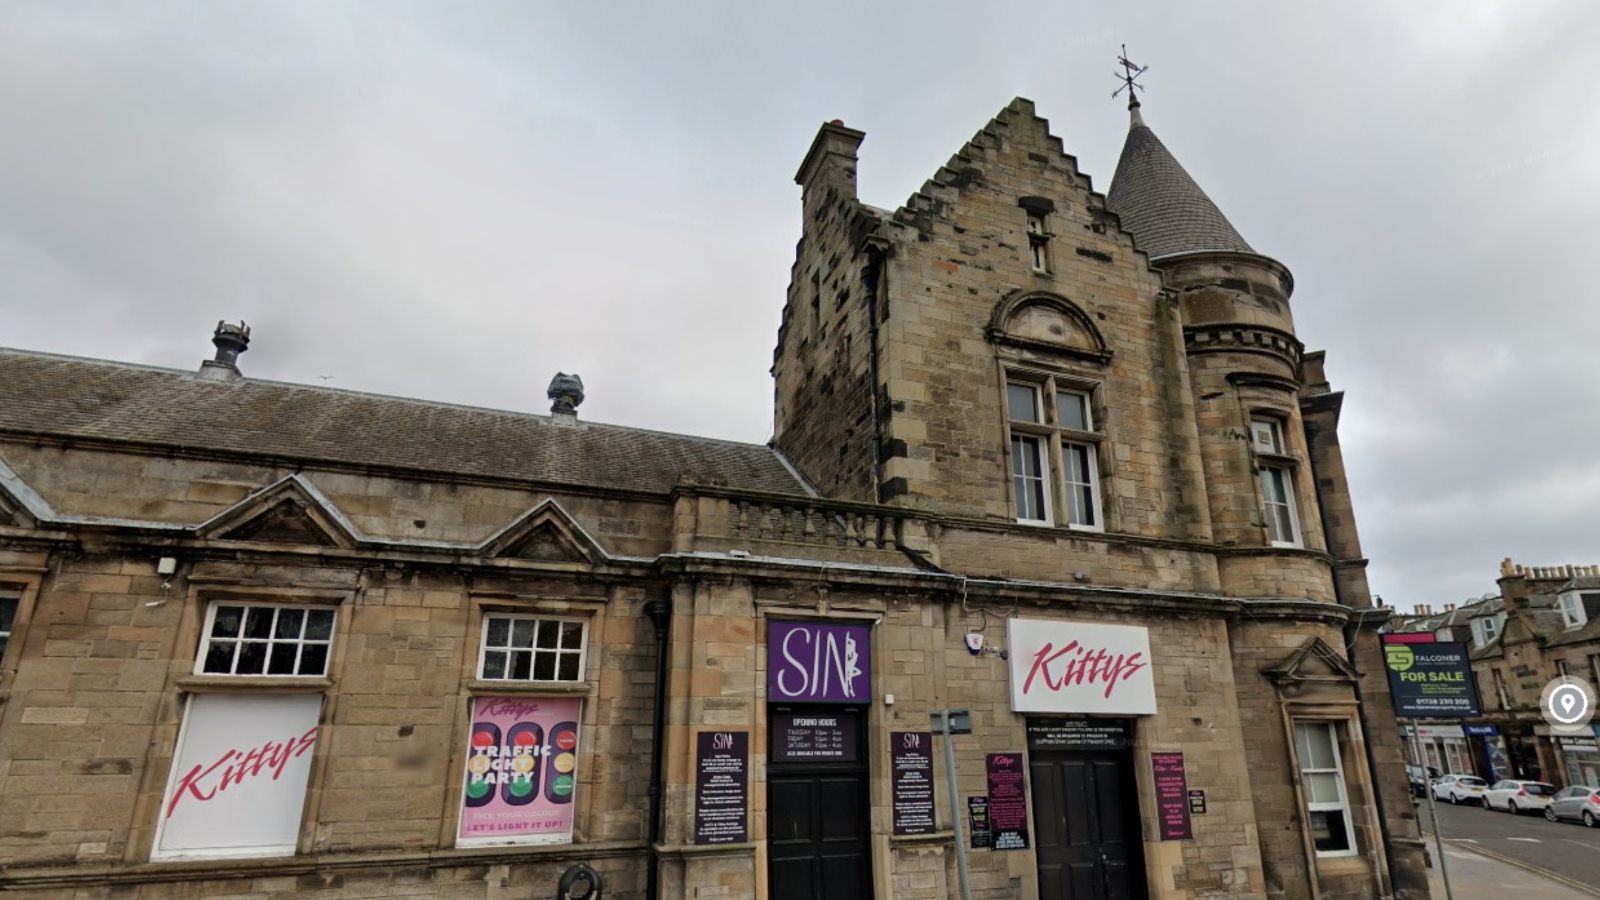 The fire broke out at the former Kitty's nightclub in Kirkcaldy.